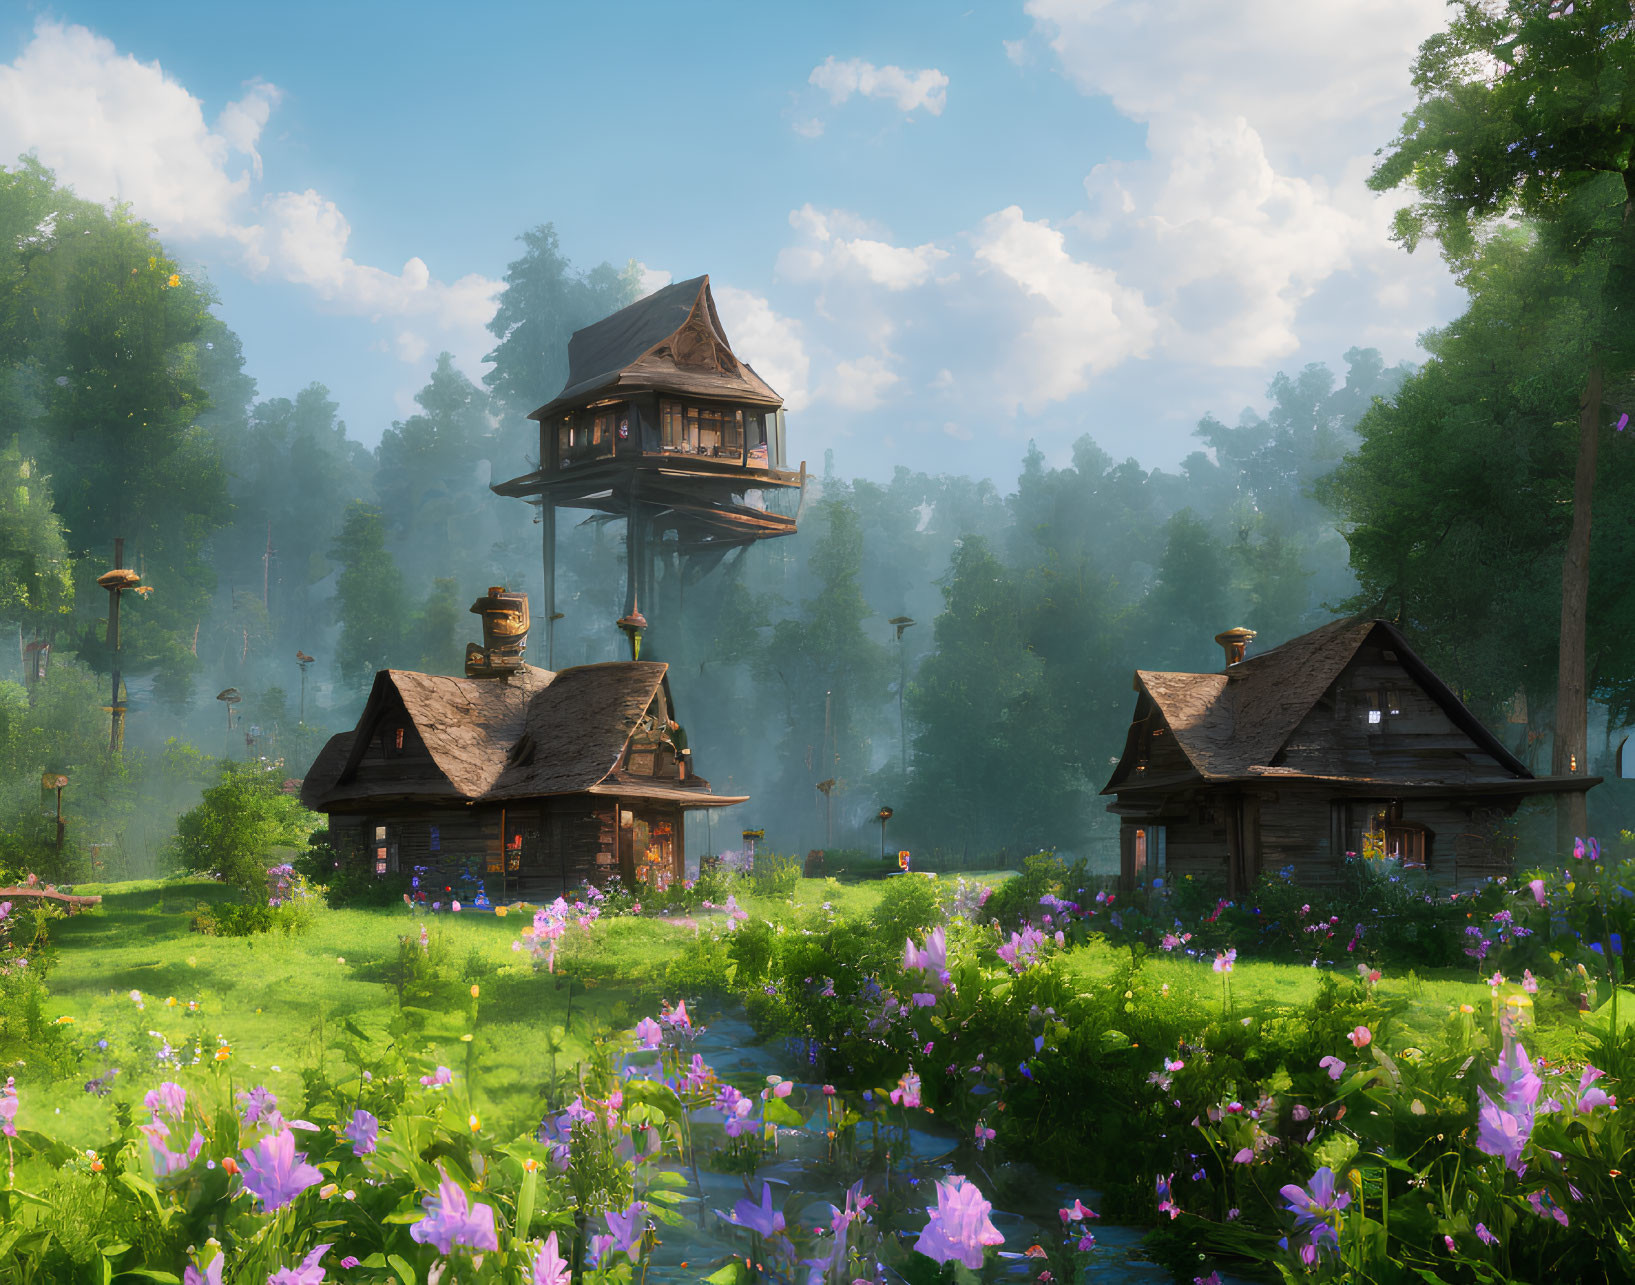 Serene fantasy village with wooden houses, tower, and lush surroundings